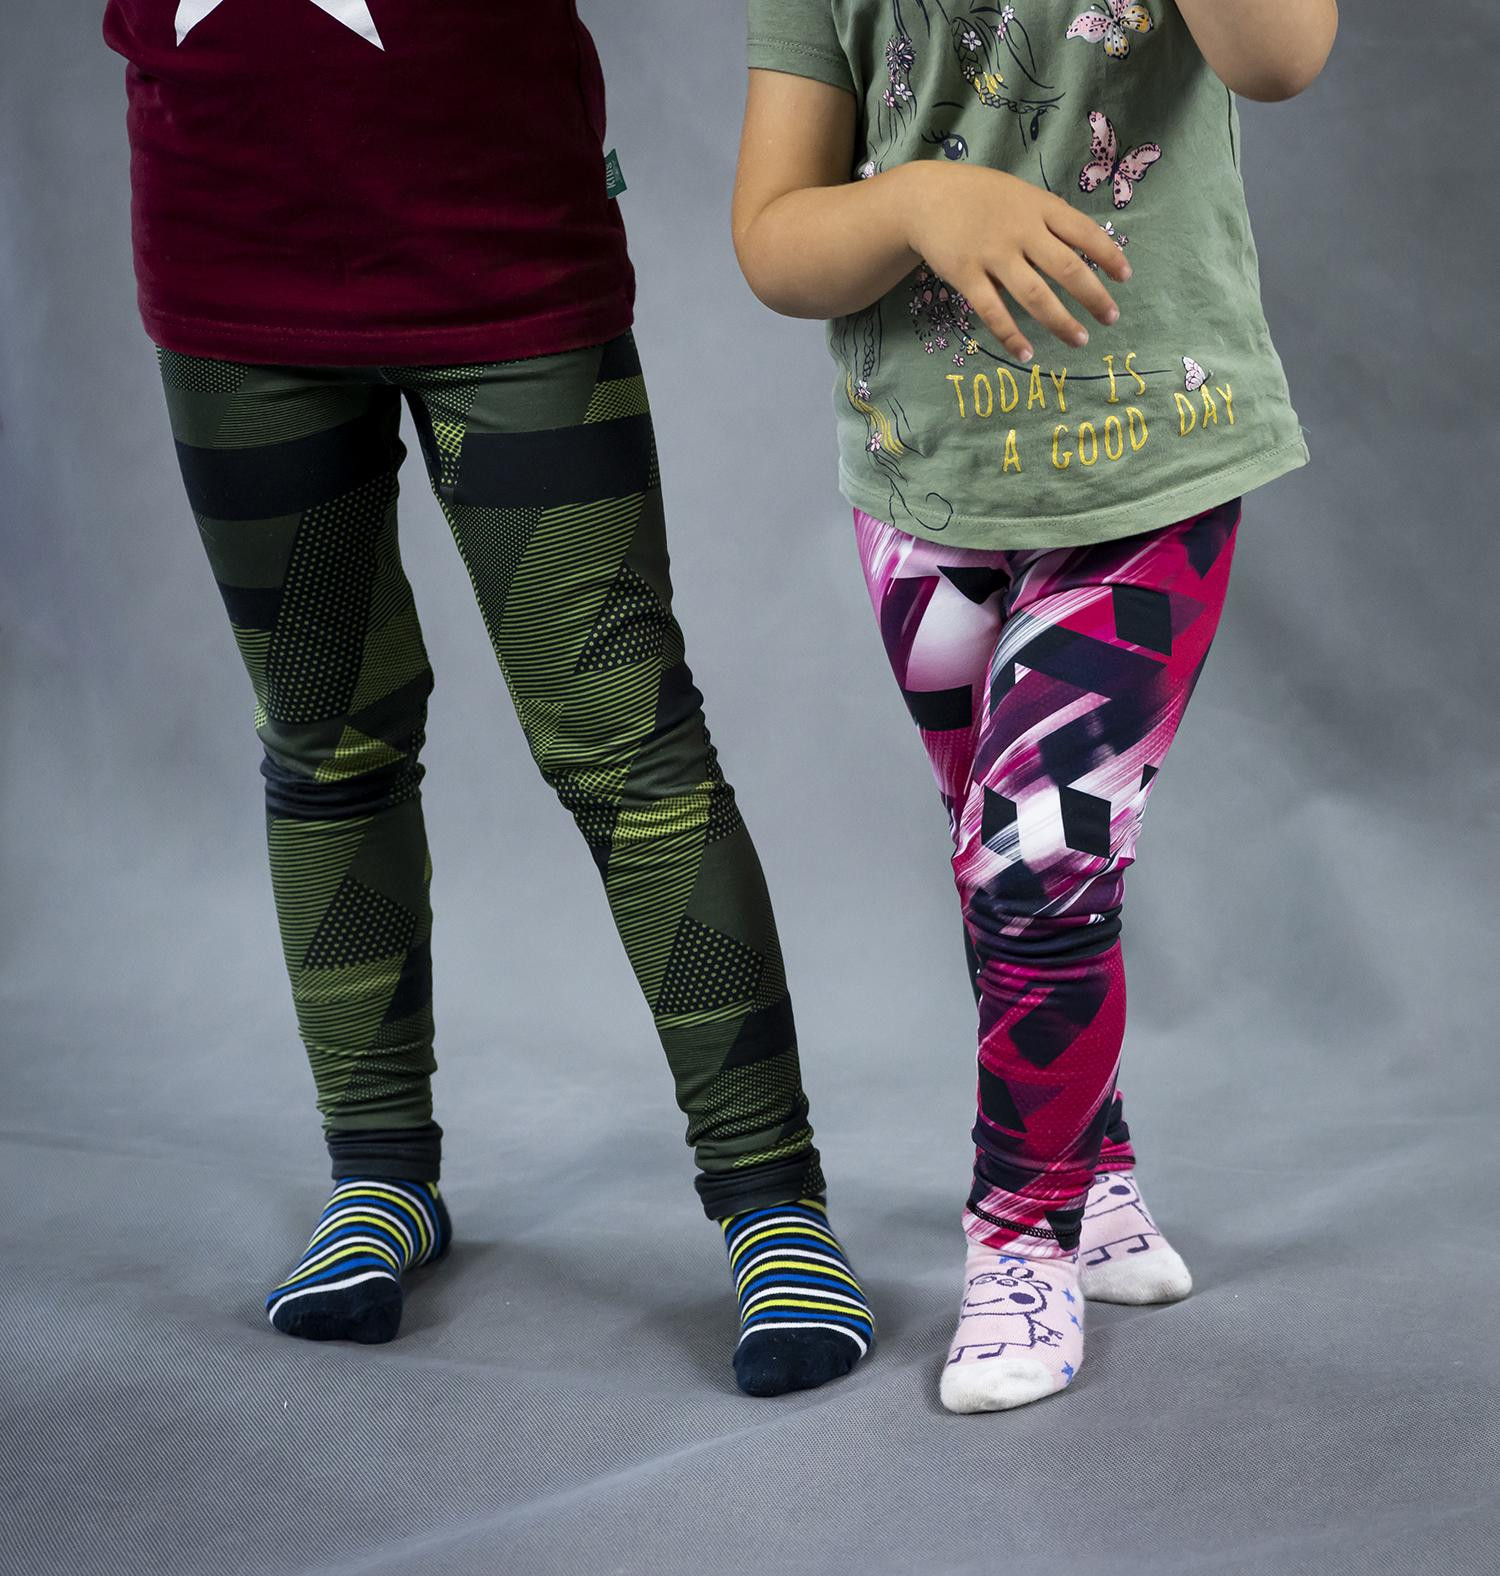 JUNGS THERMO LEGGINGS (HUGO) - CAMOUFLAGE BUNT Ms. 2 - Nähset